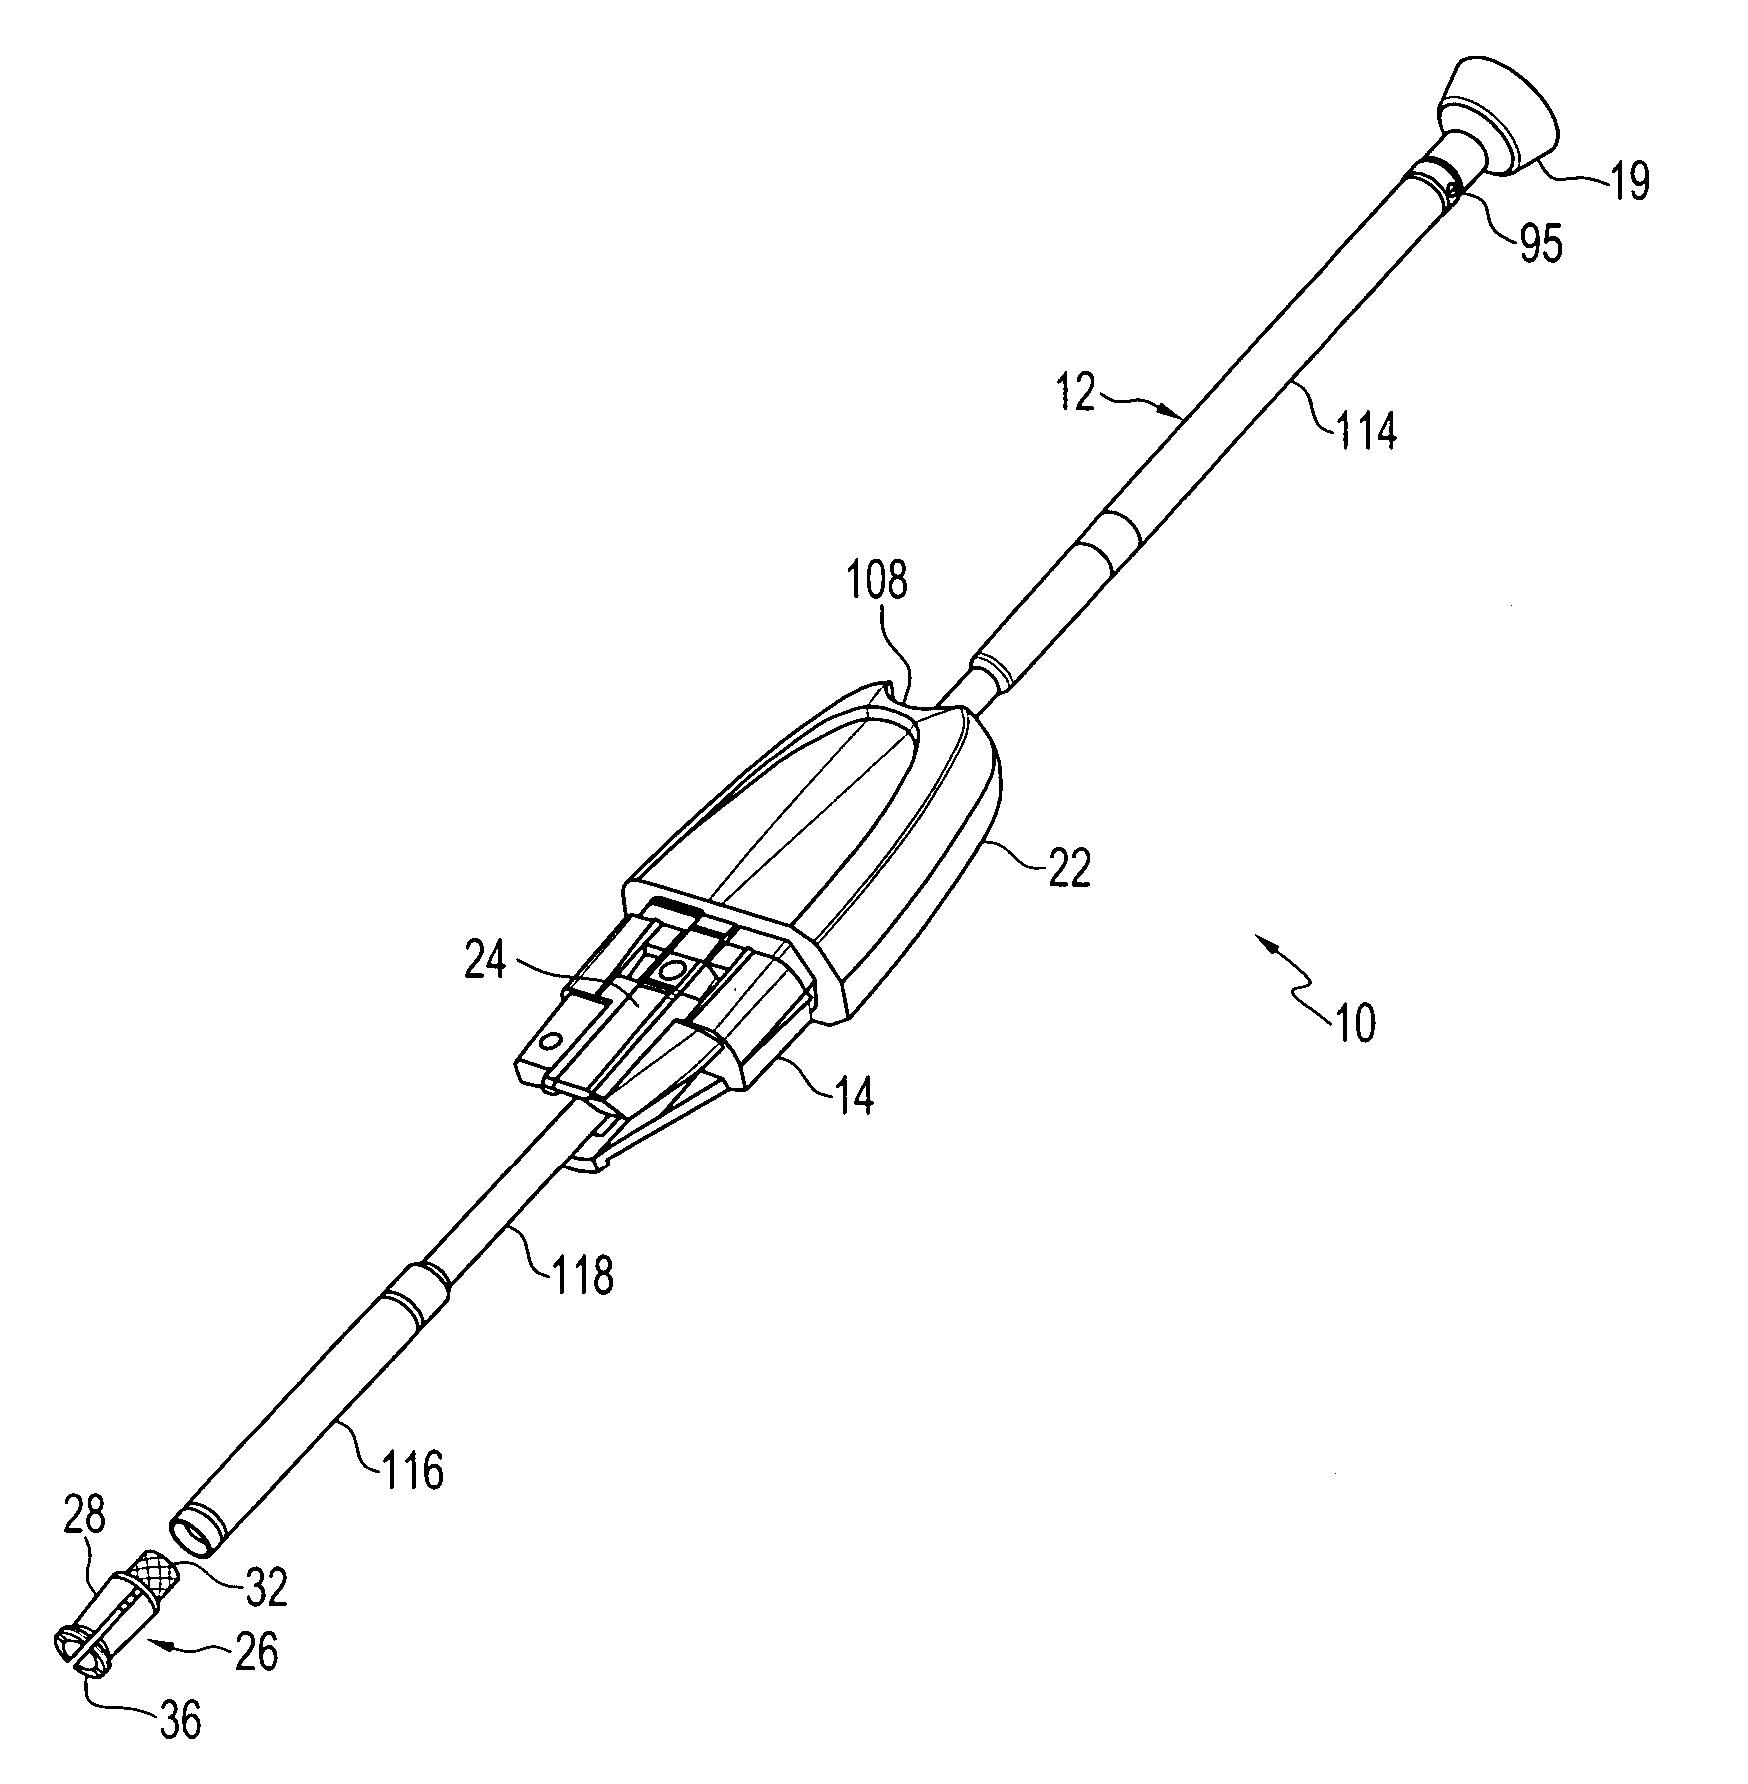 Clipped contact whip and flex antenna assembly for a device